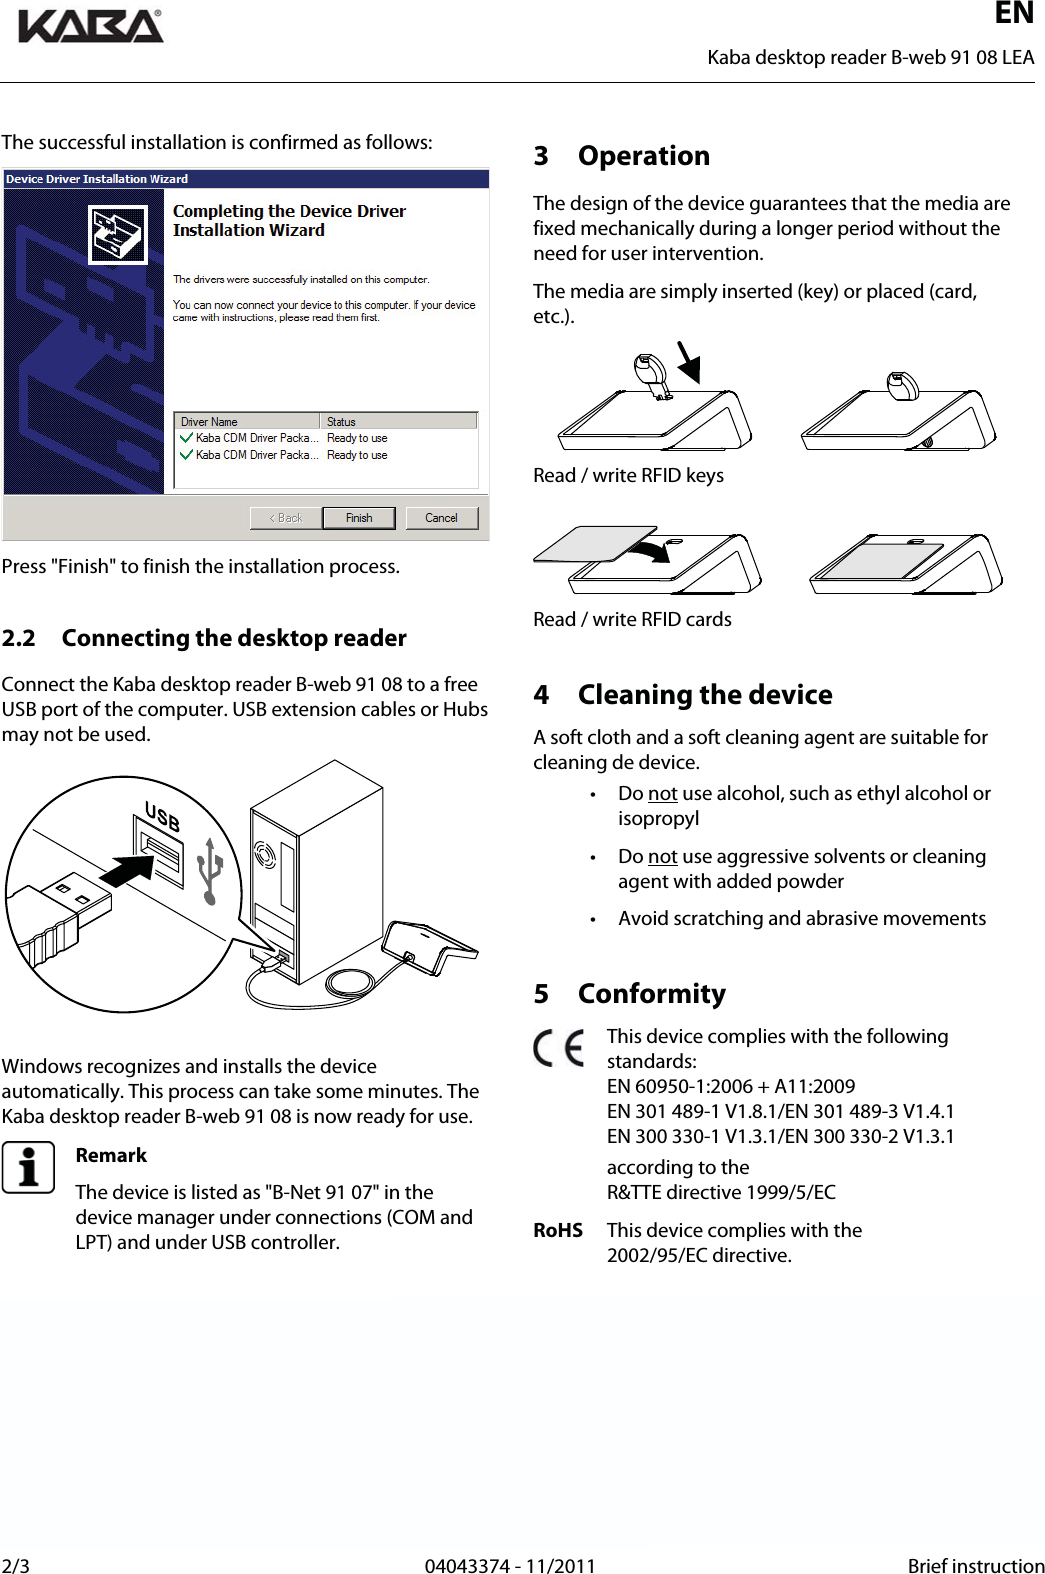  EN    Kaba desktop reader B-web 91 08 LEA 2/3  04043374 - 11/2011 Brief instructionThe successful installation is confirmed as follows: Press &quot;Finish&quot; to finish the installation process.  2.2 Connecting the desktop reader Connect the Kaba desktop reader B-web 91 08 to a free USB port of the computer. USB extension cables or Hubs may not be used.   Windows recognizes and installs the device automatically. This process can take some minutes. The Kaba desktop reader B-web 91 08 is now ready for use.  Remark The device is listed as &quot;B-Net 91 07&quot; in the device manager under connections (COM and LPT) and under USB controller.   3 Operation The design of the device guarantees that the media are fixed mechanically during a longer period without the need for user intervention. The media are simply inserted (key) or placed (card, etc.).  Read / write RFID keys   Read / write RFID cards  4 Cleaning the device A soft cloth and a soft cleaning agent are suitable for cleaning de device. • Do not use alcohol, such as ethyl alcohol or isopropyl • Do not use aggressive solvents or cleaning agent with added powder •  Avoid scratching and abrasive movements  5 Conformity  This device complies with the following standards: EN 60950-1:2006 + A11:2009 EN 301 489-1 V1.8.1/EN 301 489-3 V1.4.1 EN 300 330-1 V1.3.1/EN 300 330-2 V1.3.1   according to the  R&amp;TTE directive 1999/5/EC RoHS  This device complies with the  2002/95/EC directive.   Manufacturer: Kaba GmbH Workforce Management Albertistraße 3 D-78056 Villingen-Schwenningen Sales:  